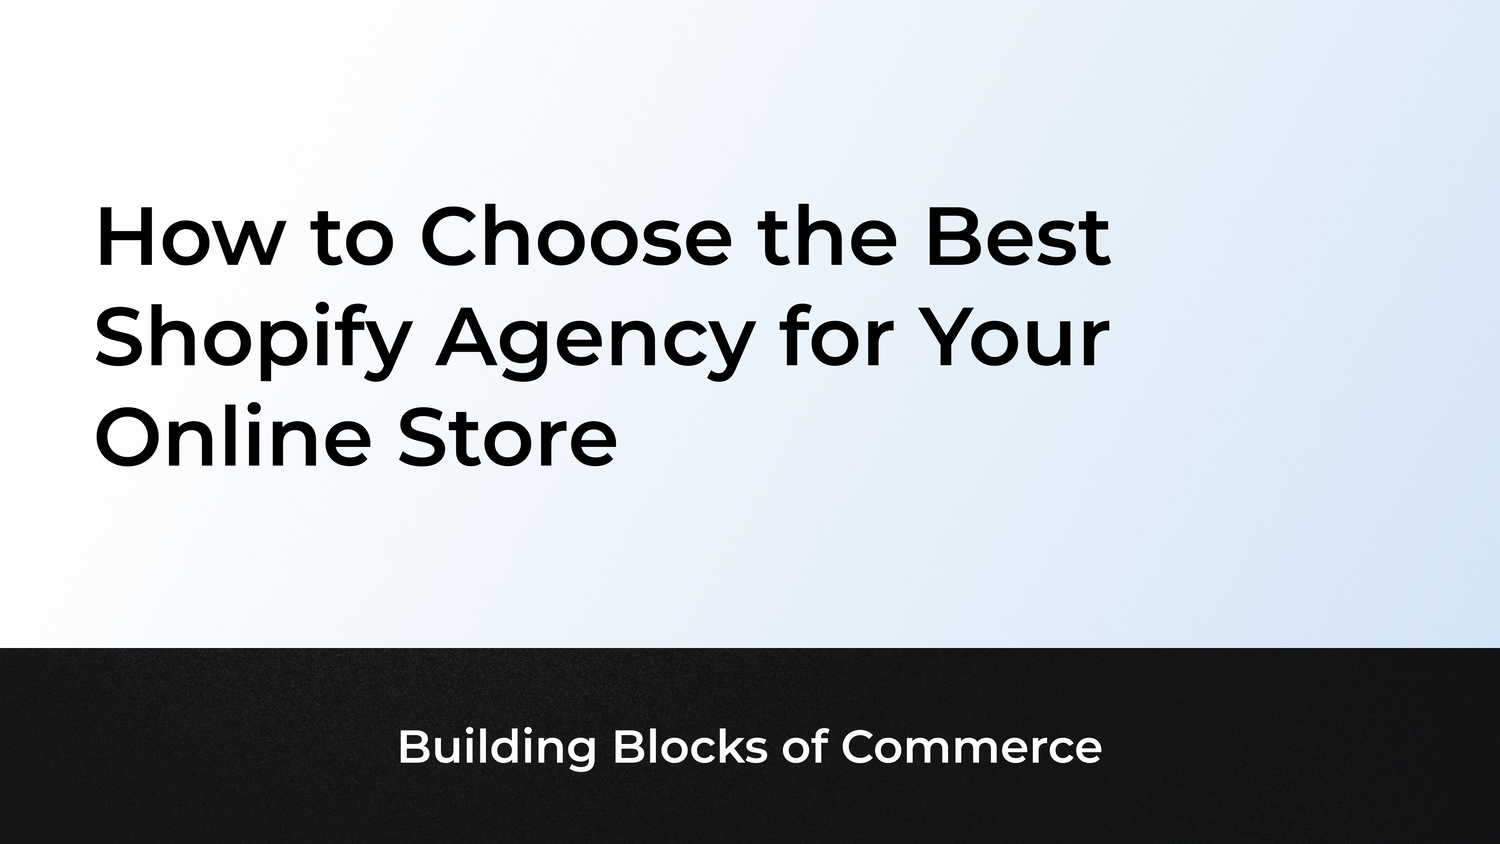 How to Choose the Best Shopify Agency for Your Online Store